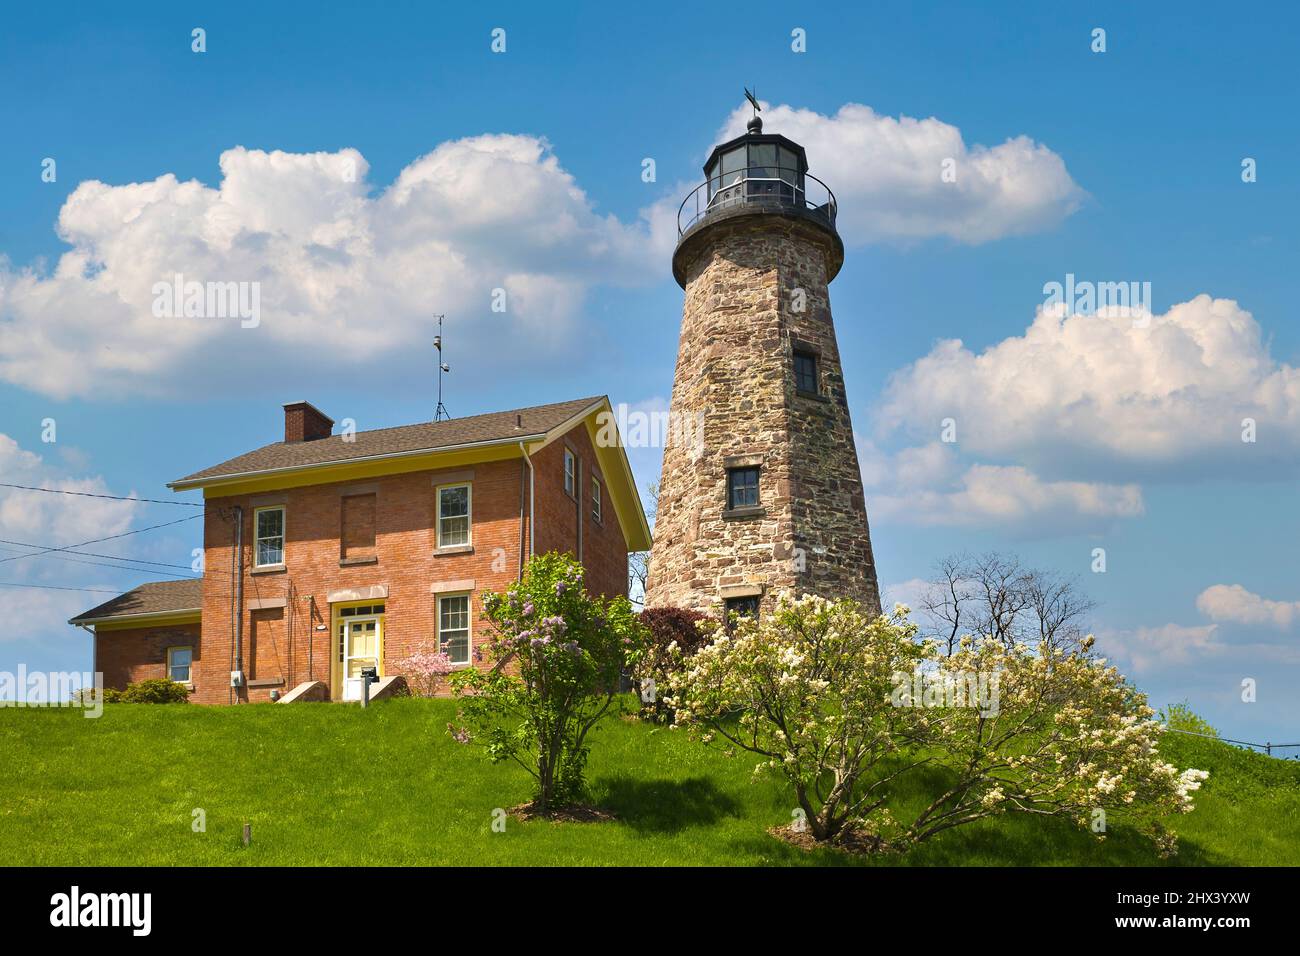 Charlotte-Genesee Lighthouse built in 1822 in Rochester New York the oldest surviving lighthouse on Lake Ontario Stock Photo